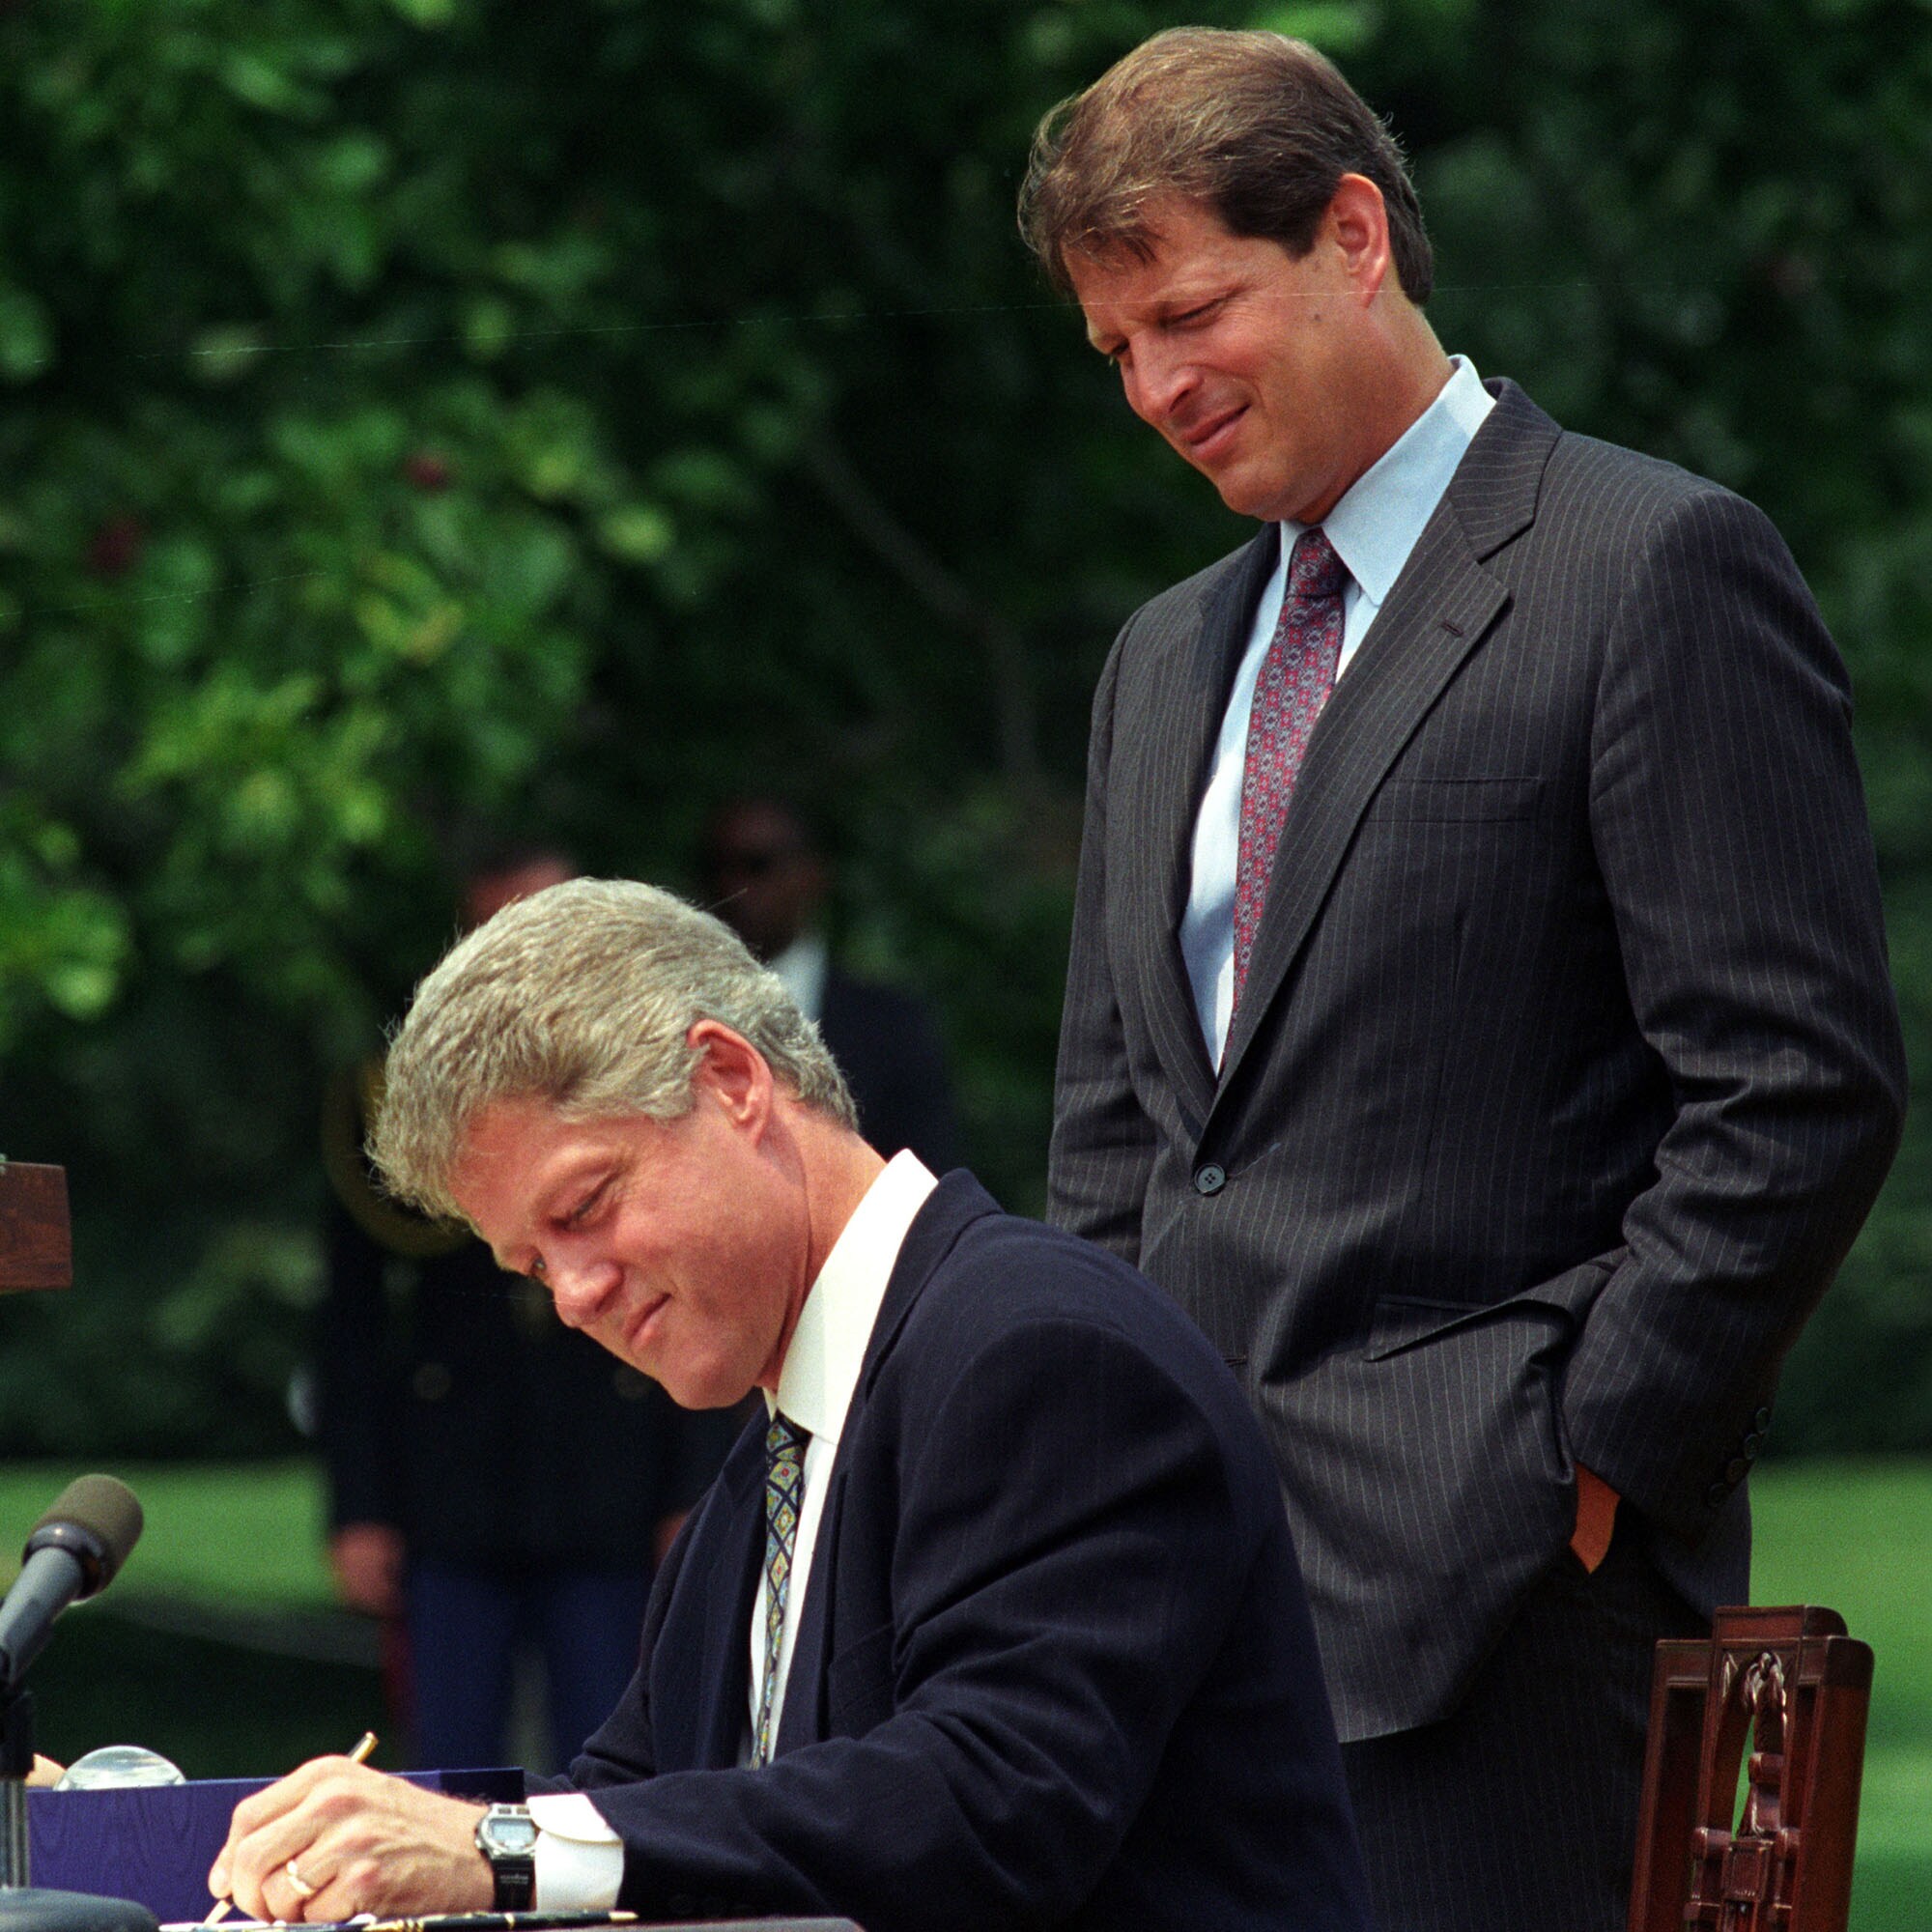 President Bill Clinton and Vice President Al Gore signing the Childhood Immunization Initiative Act, 1993